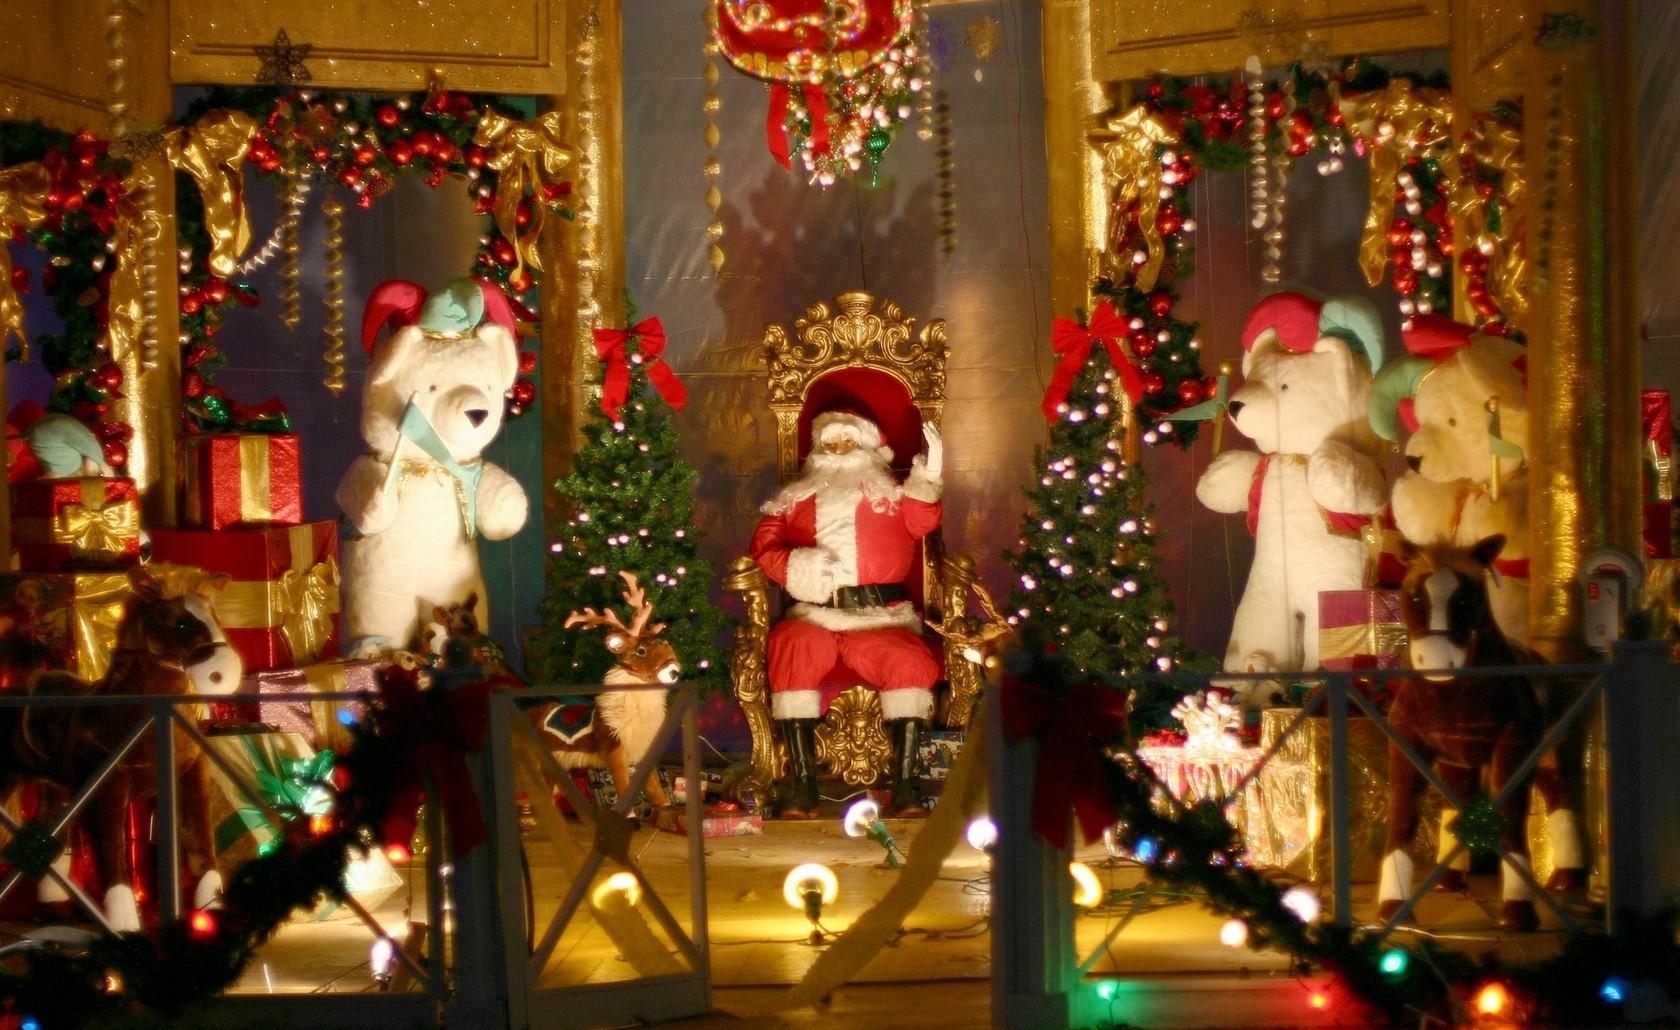 enclosure, decorations, presents, holidays, santa claus, toys, fir trees, bears, christmas, armchair, fencing, gifts